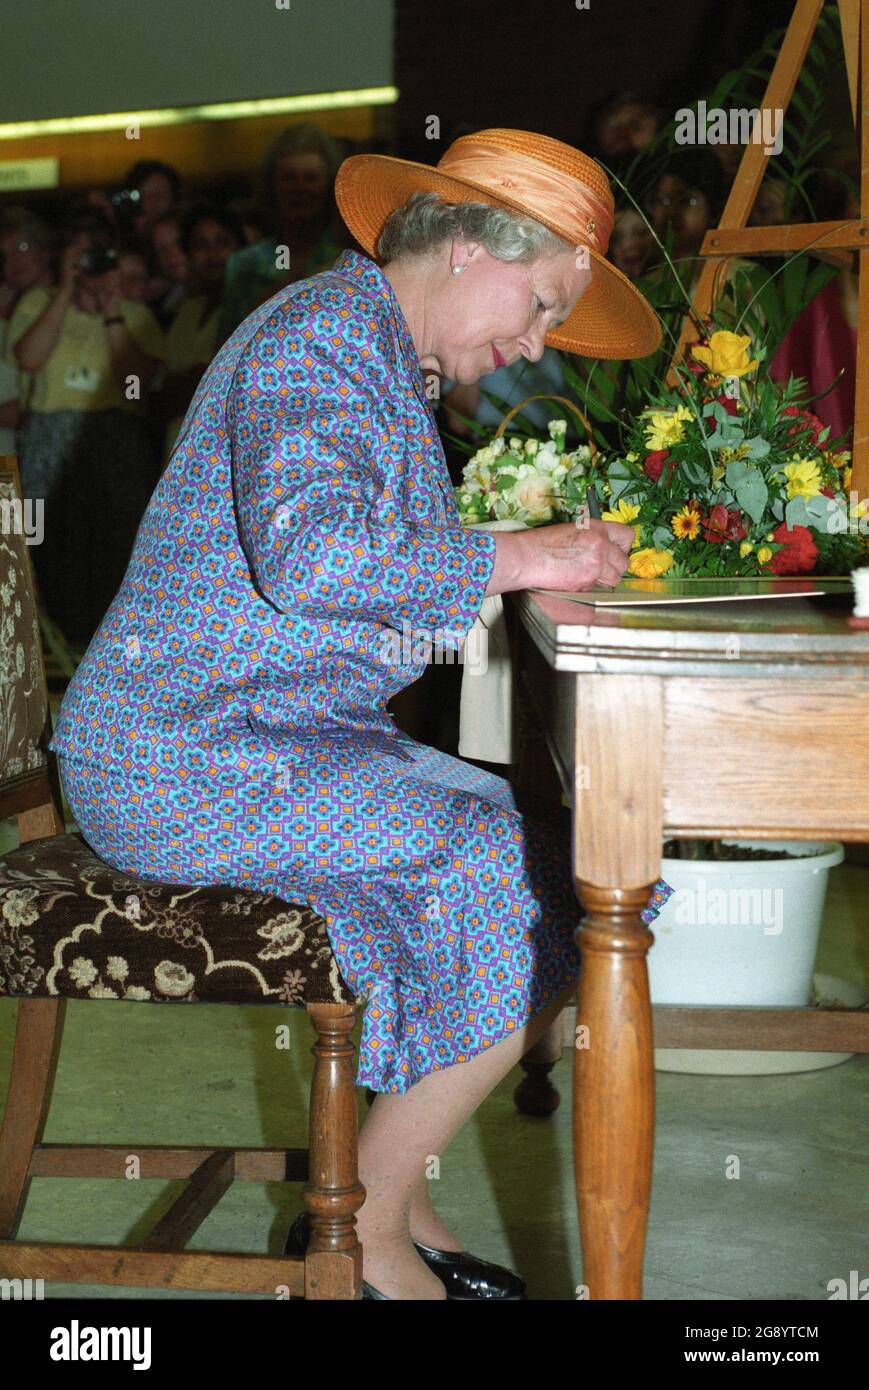 Her Majesty Queen Elizabeth signing visitors book in 1994 Stock Photo